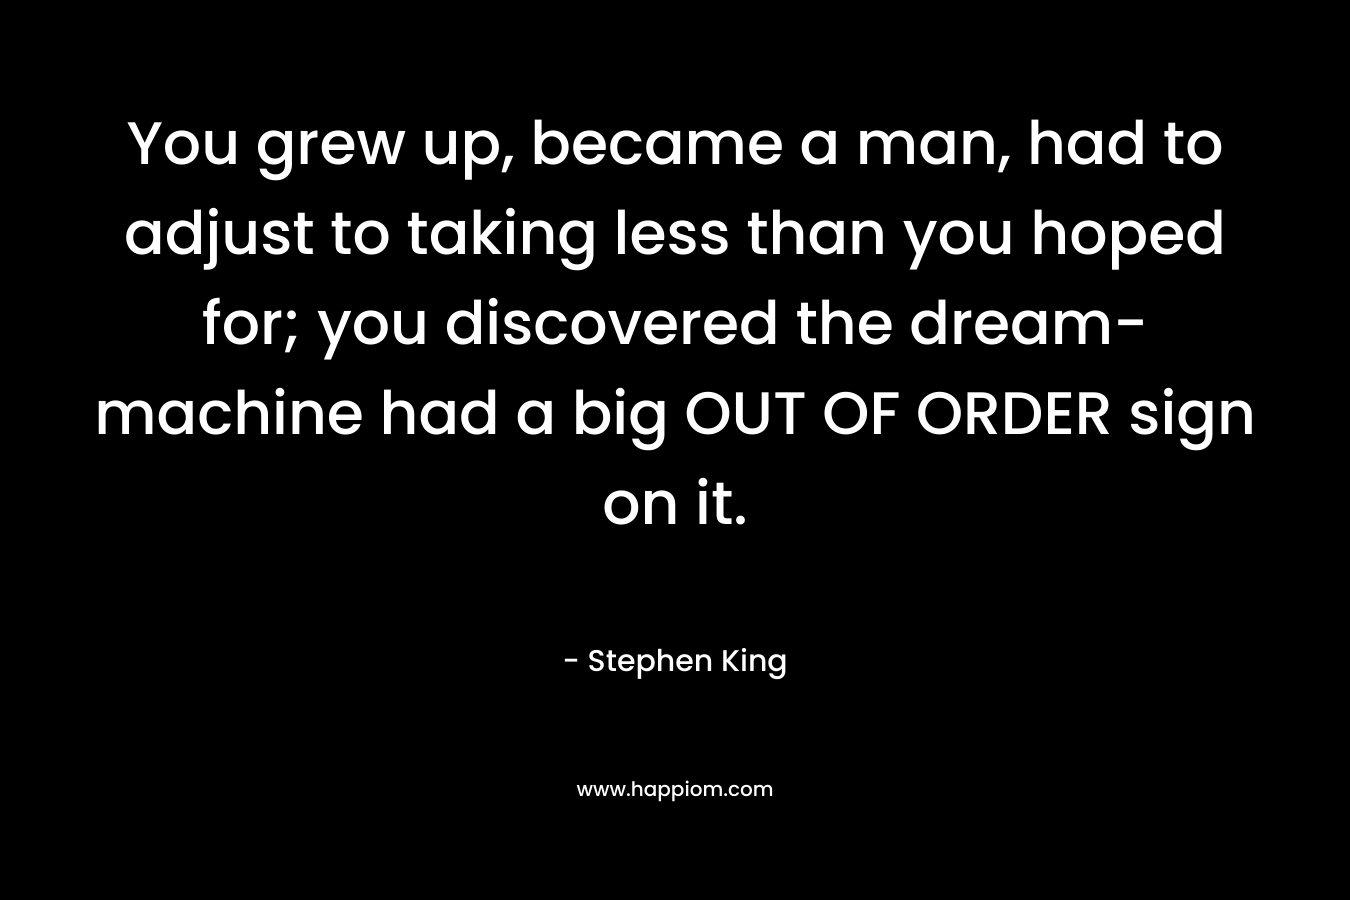 You grew up, became a man, had to adjust to taking less than you hoped for; you discovered the dream-machine had a big OUT OF ORDER sign on it. – Stephen King